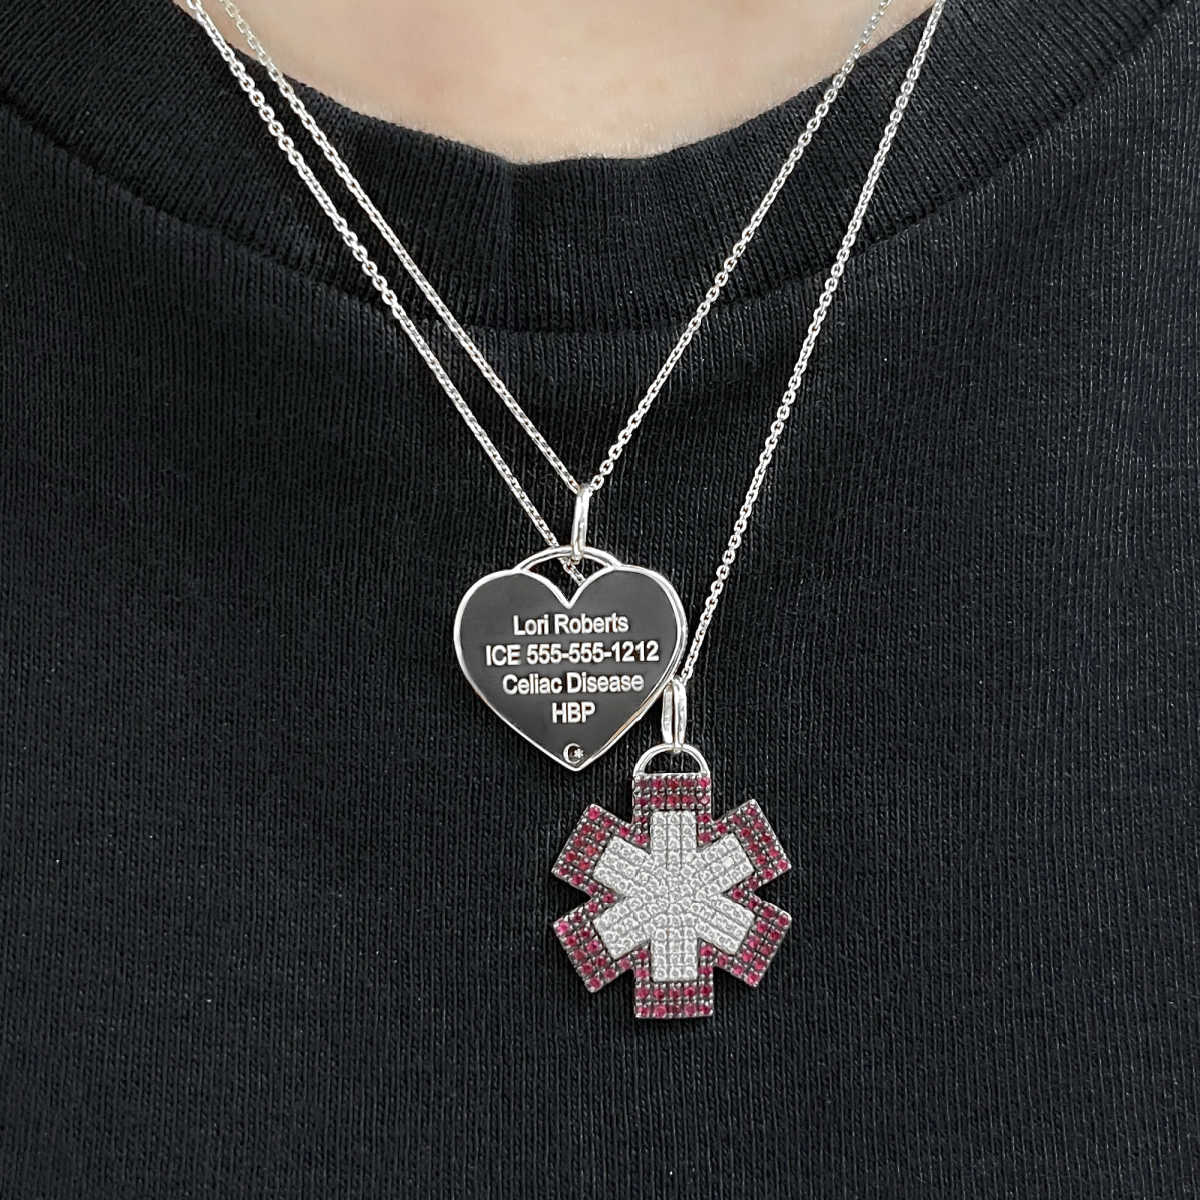 Gold Medical Alert Charm | Diamond & Ruby Star of Life Medical ID Pendant | Custom Engraved | CHARMED Medical Jewelry